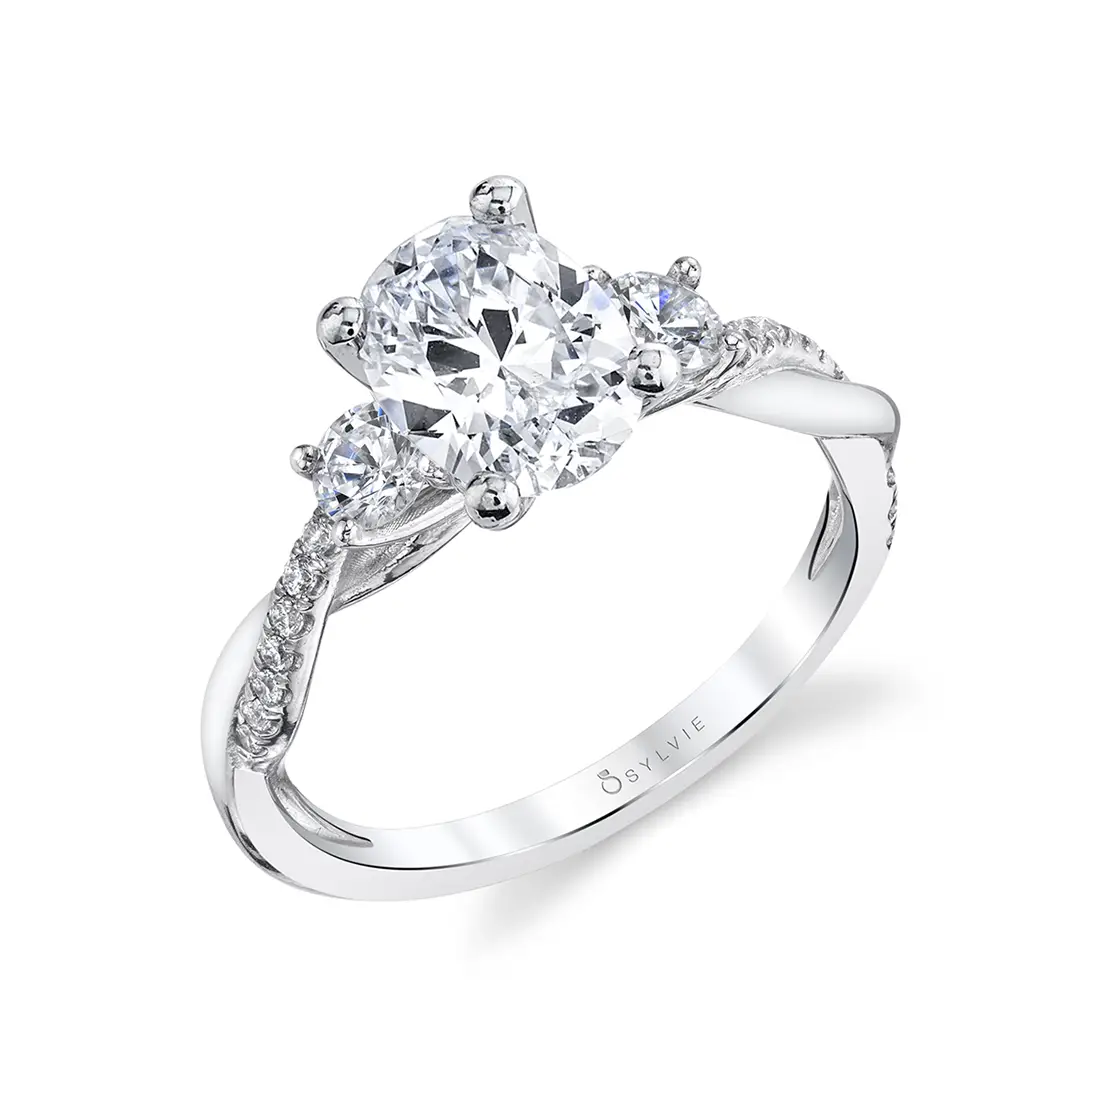 3 stone oval engagement ring with round side stones in white gold